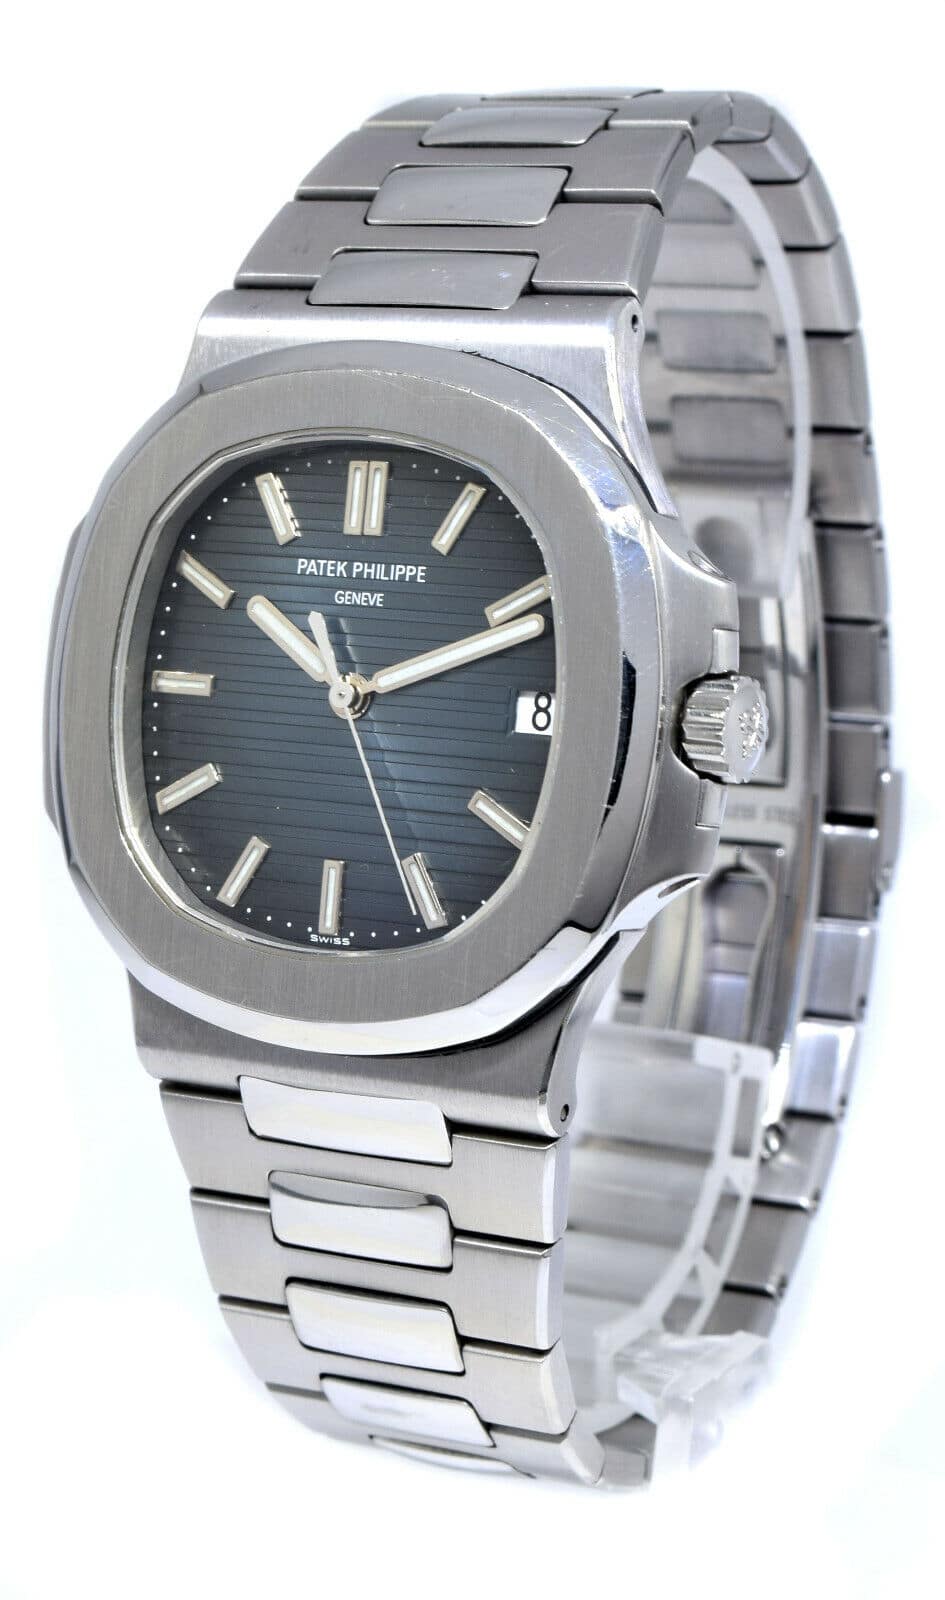 Patek Philippe Nautilus Stainless Steel Blue Dial Watch B/P '08 5711/1A-010  - Jewels in Time